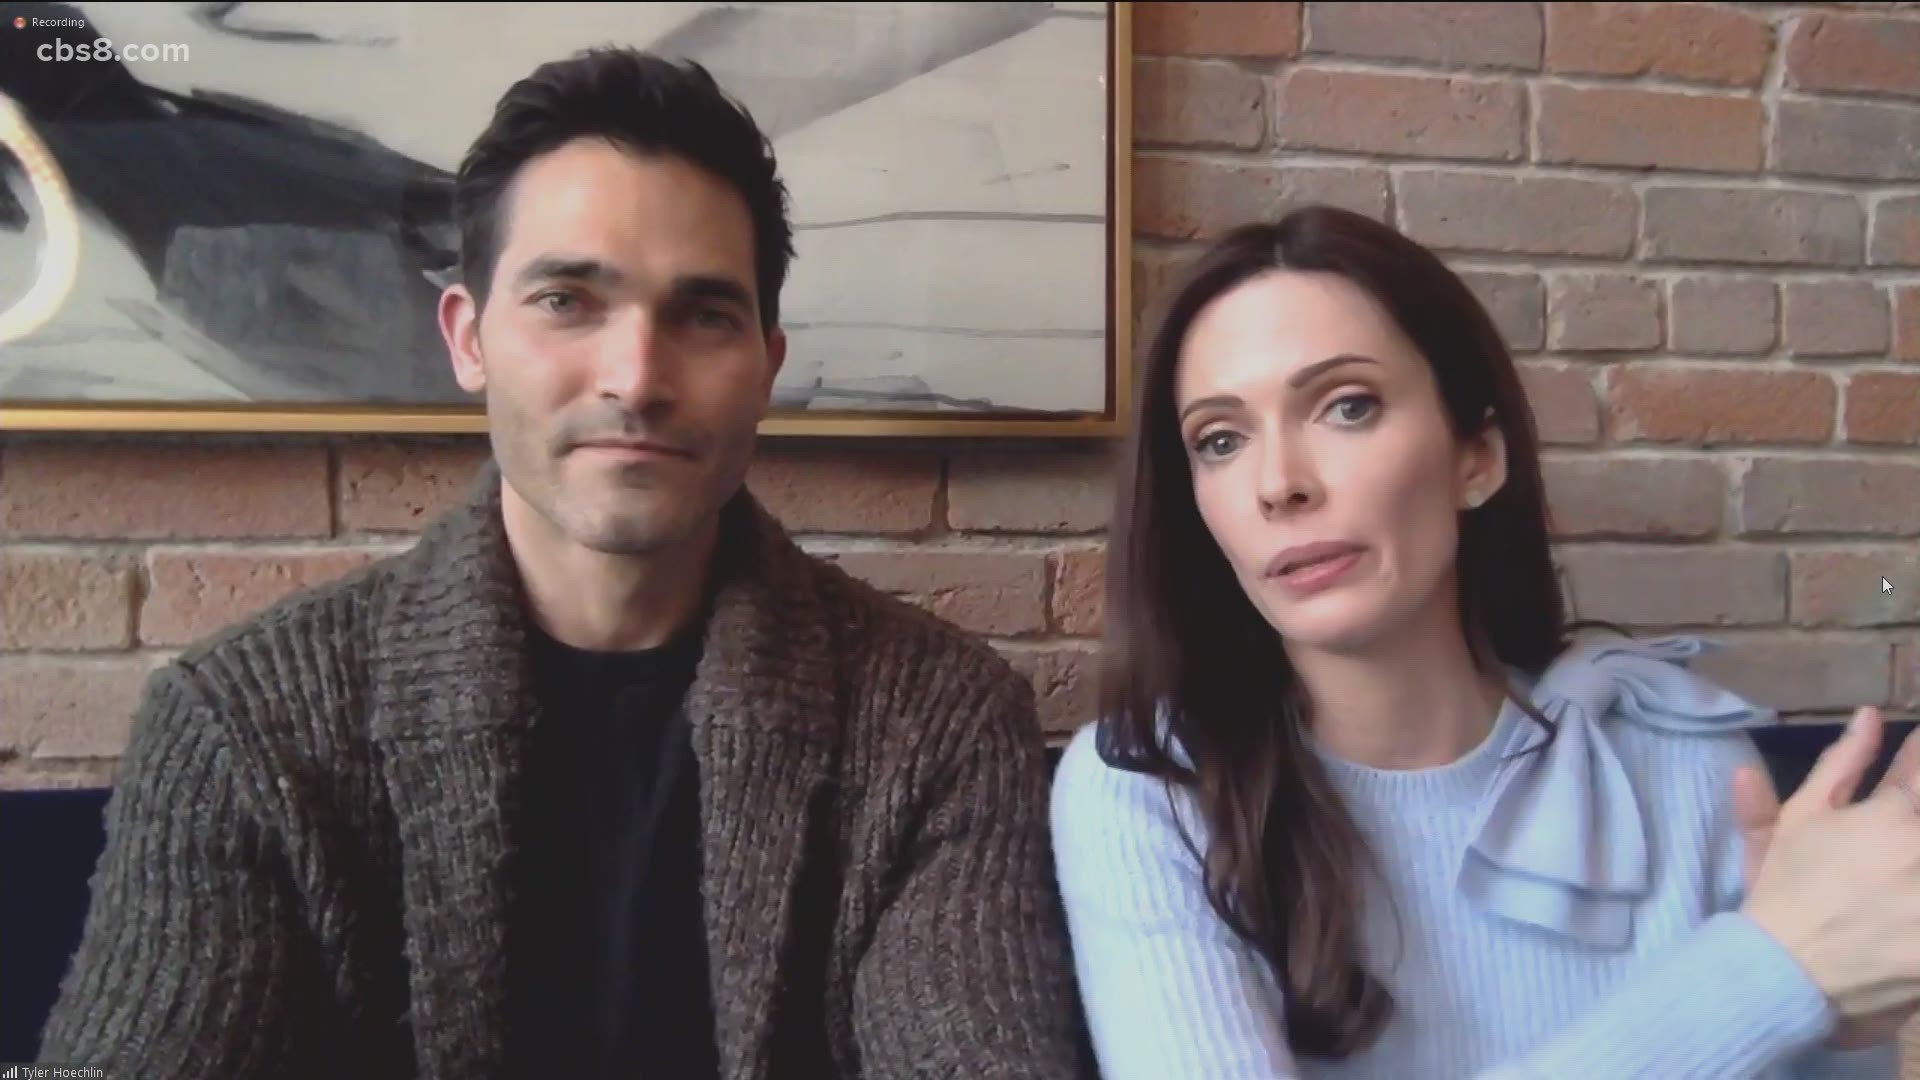 Tyler Hoechlin and Bitsie Tulloch who play Euperman and Lois joined Morning Extra to talk about the season and what fans can expect.